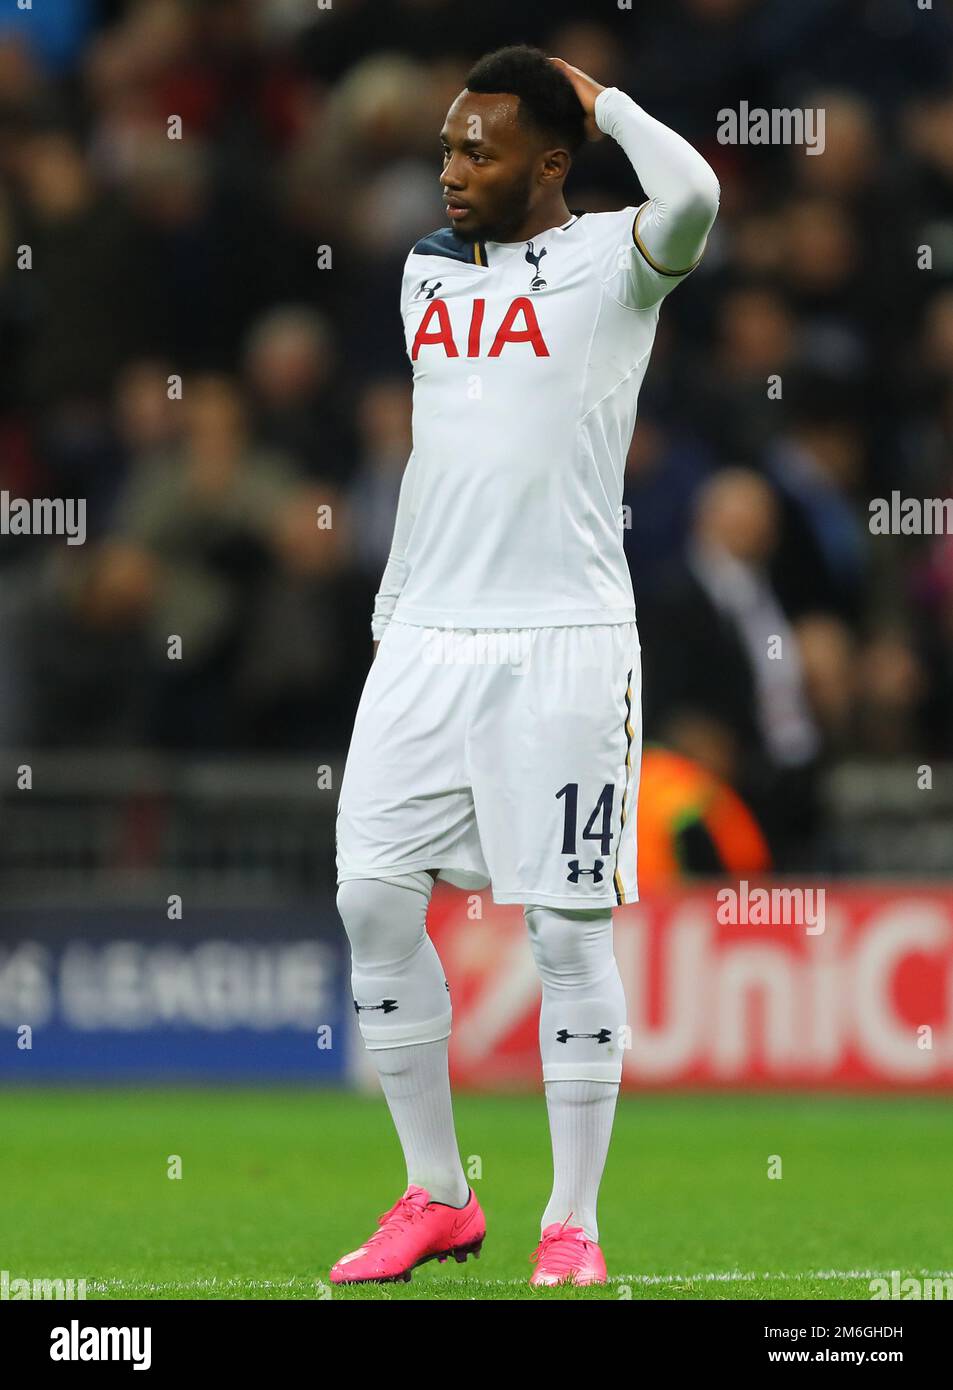 Georges-Kevin Nkoudou of Tottenham Hotspur looks on after the defeat to  Bayer Leverkusen - Tottenham Hotspur v Bayer Leverkusen, UEFA Champions  League, Wembley Stadium, London - 2nd November 2016 Stock Photo - Alamy